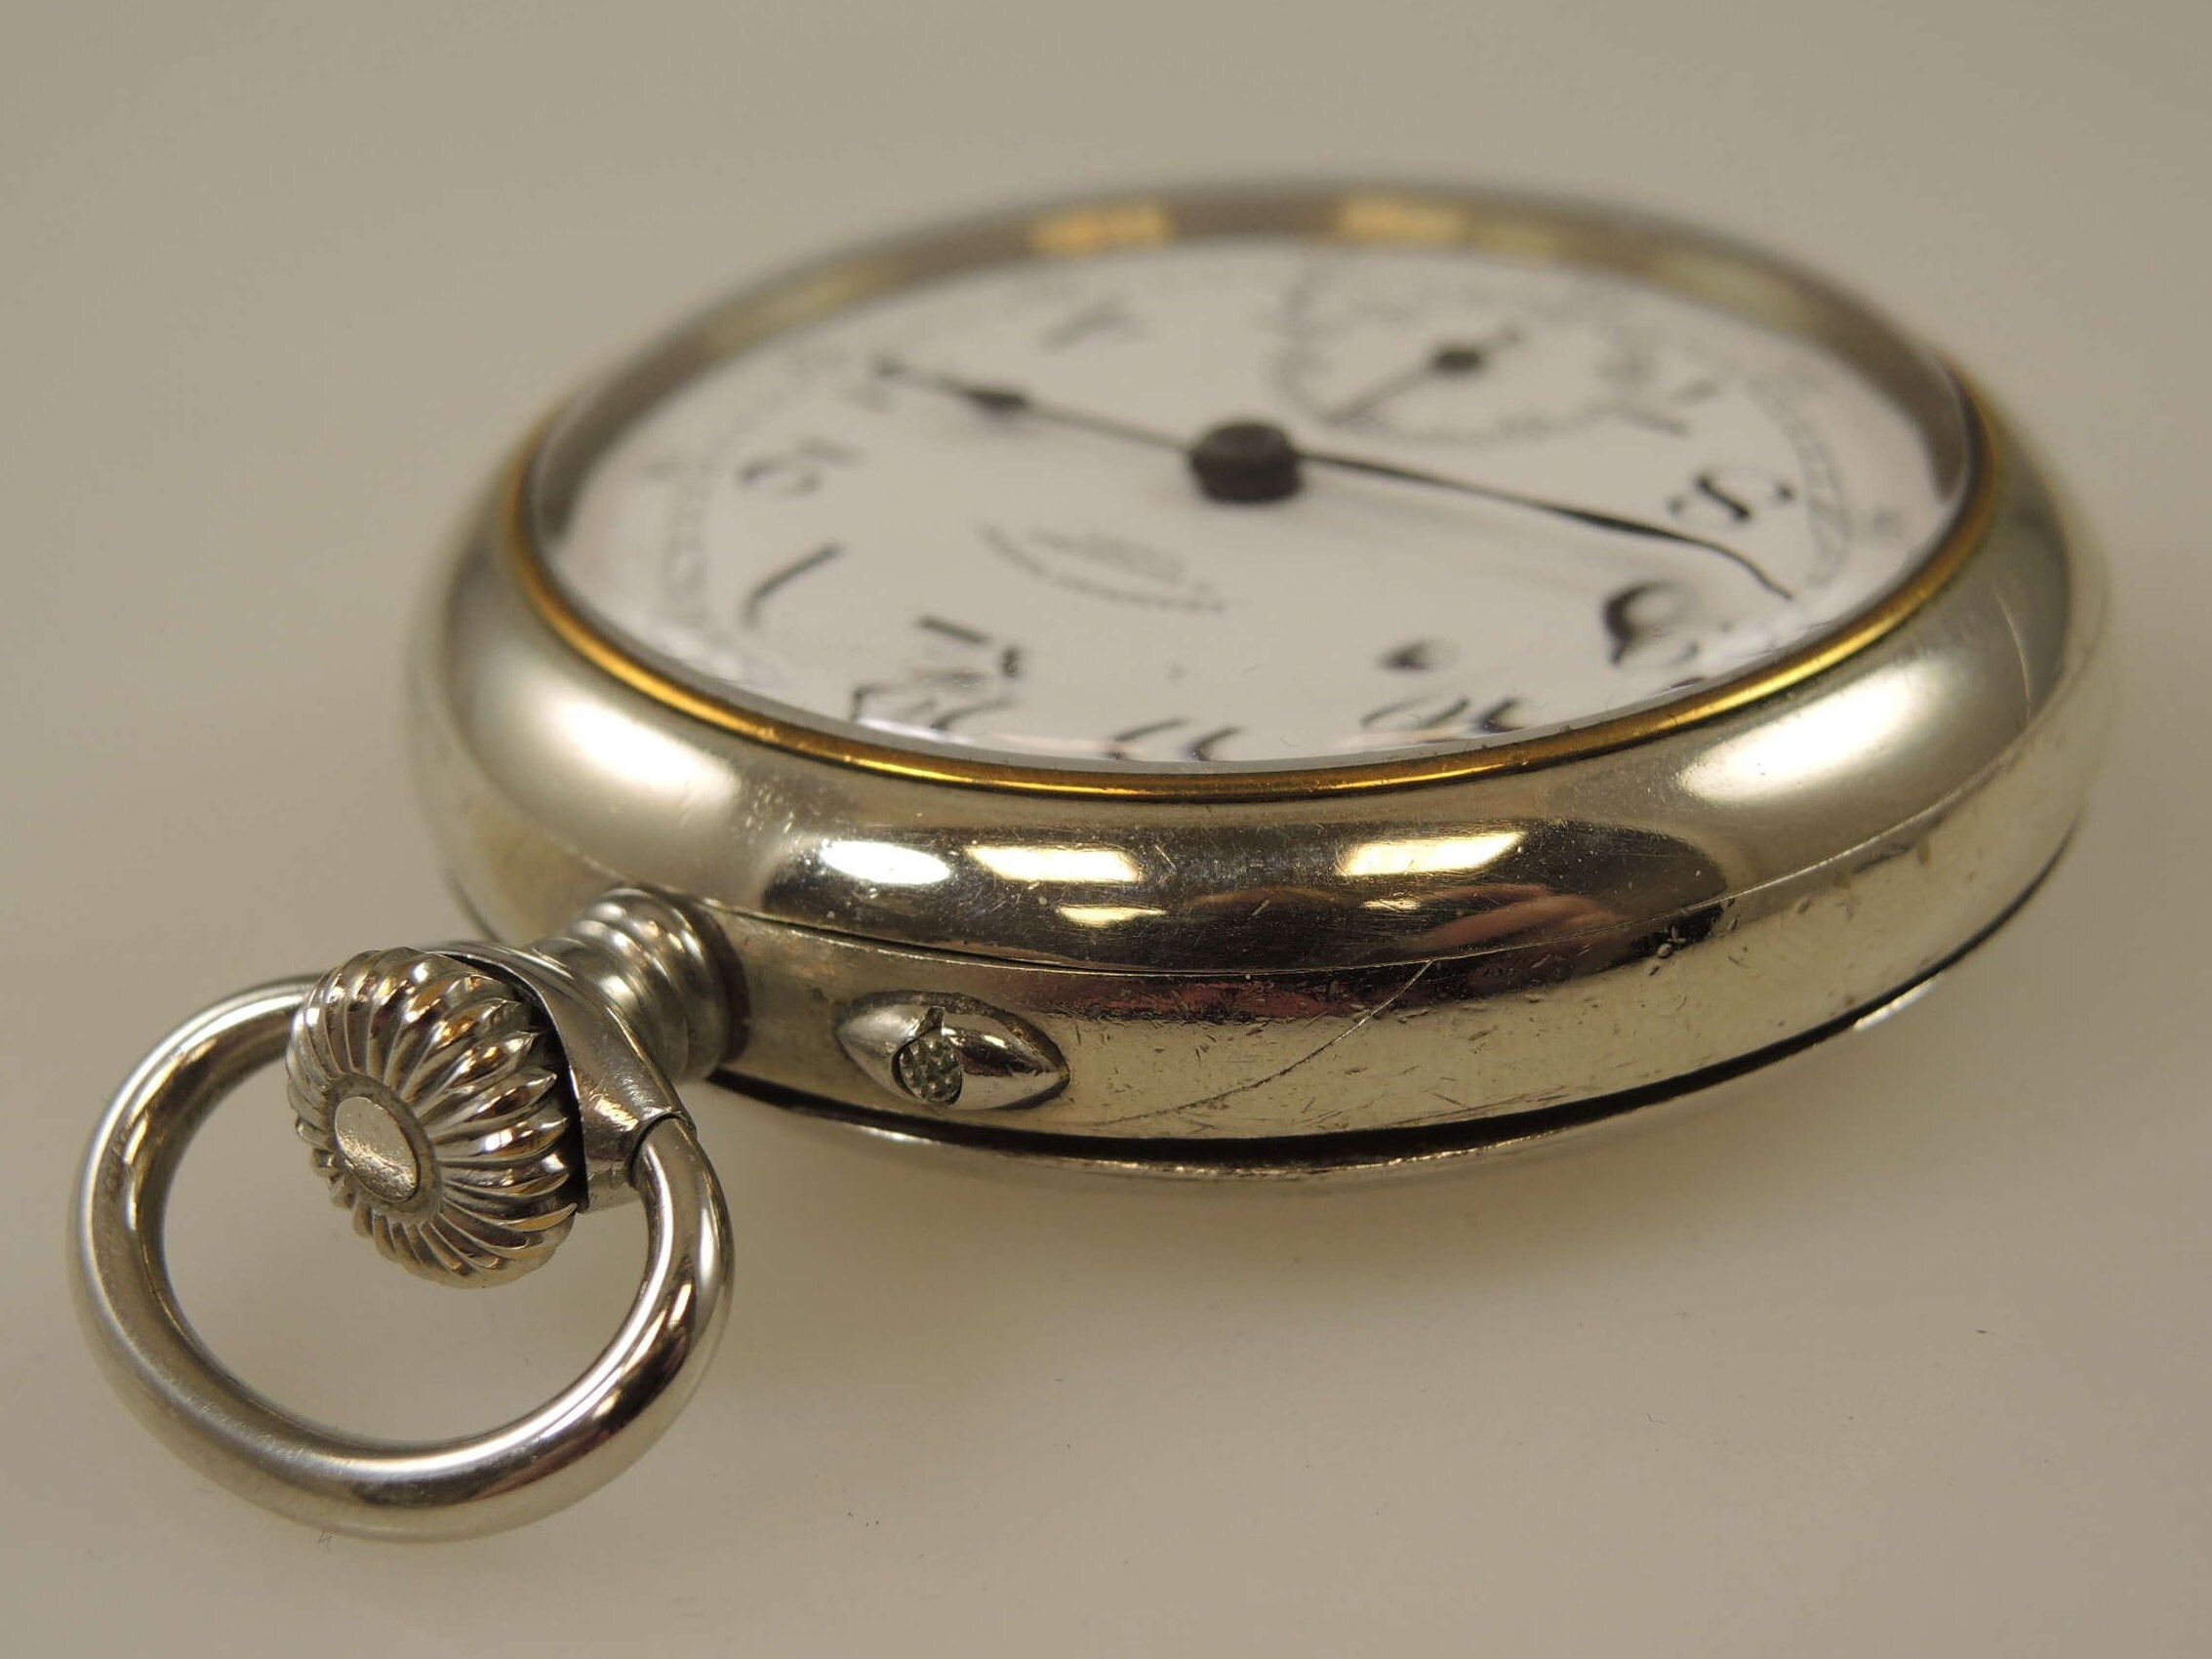 Rare TRAM Pocket Watch by Moeris With Tank Markings Also. - Etsy